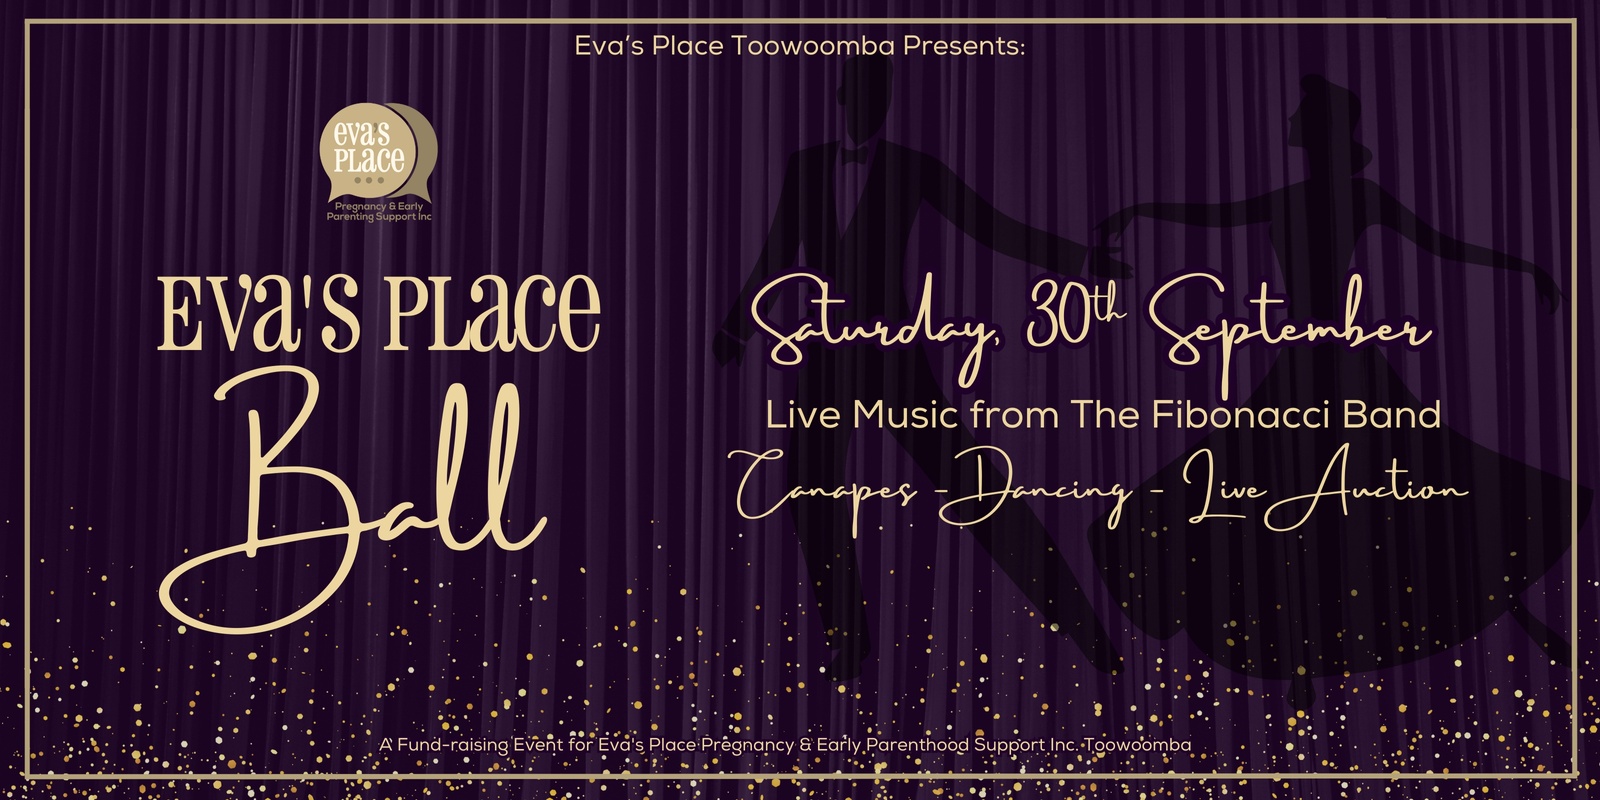 Banner image for Eva's Place Ball - Hosted By Eva's Place Toowoomba